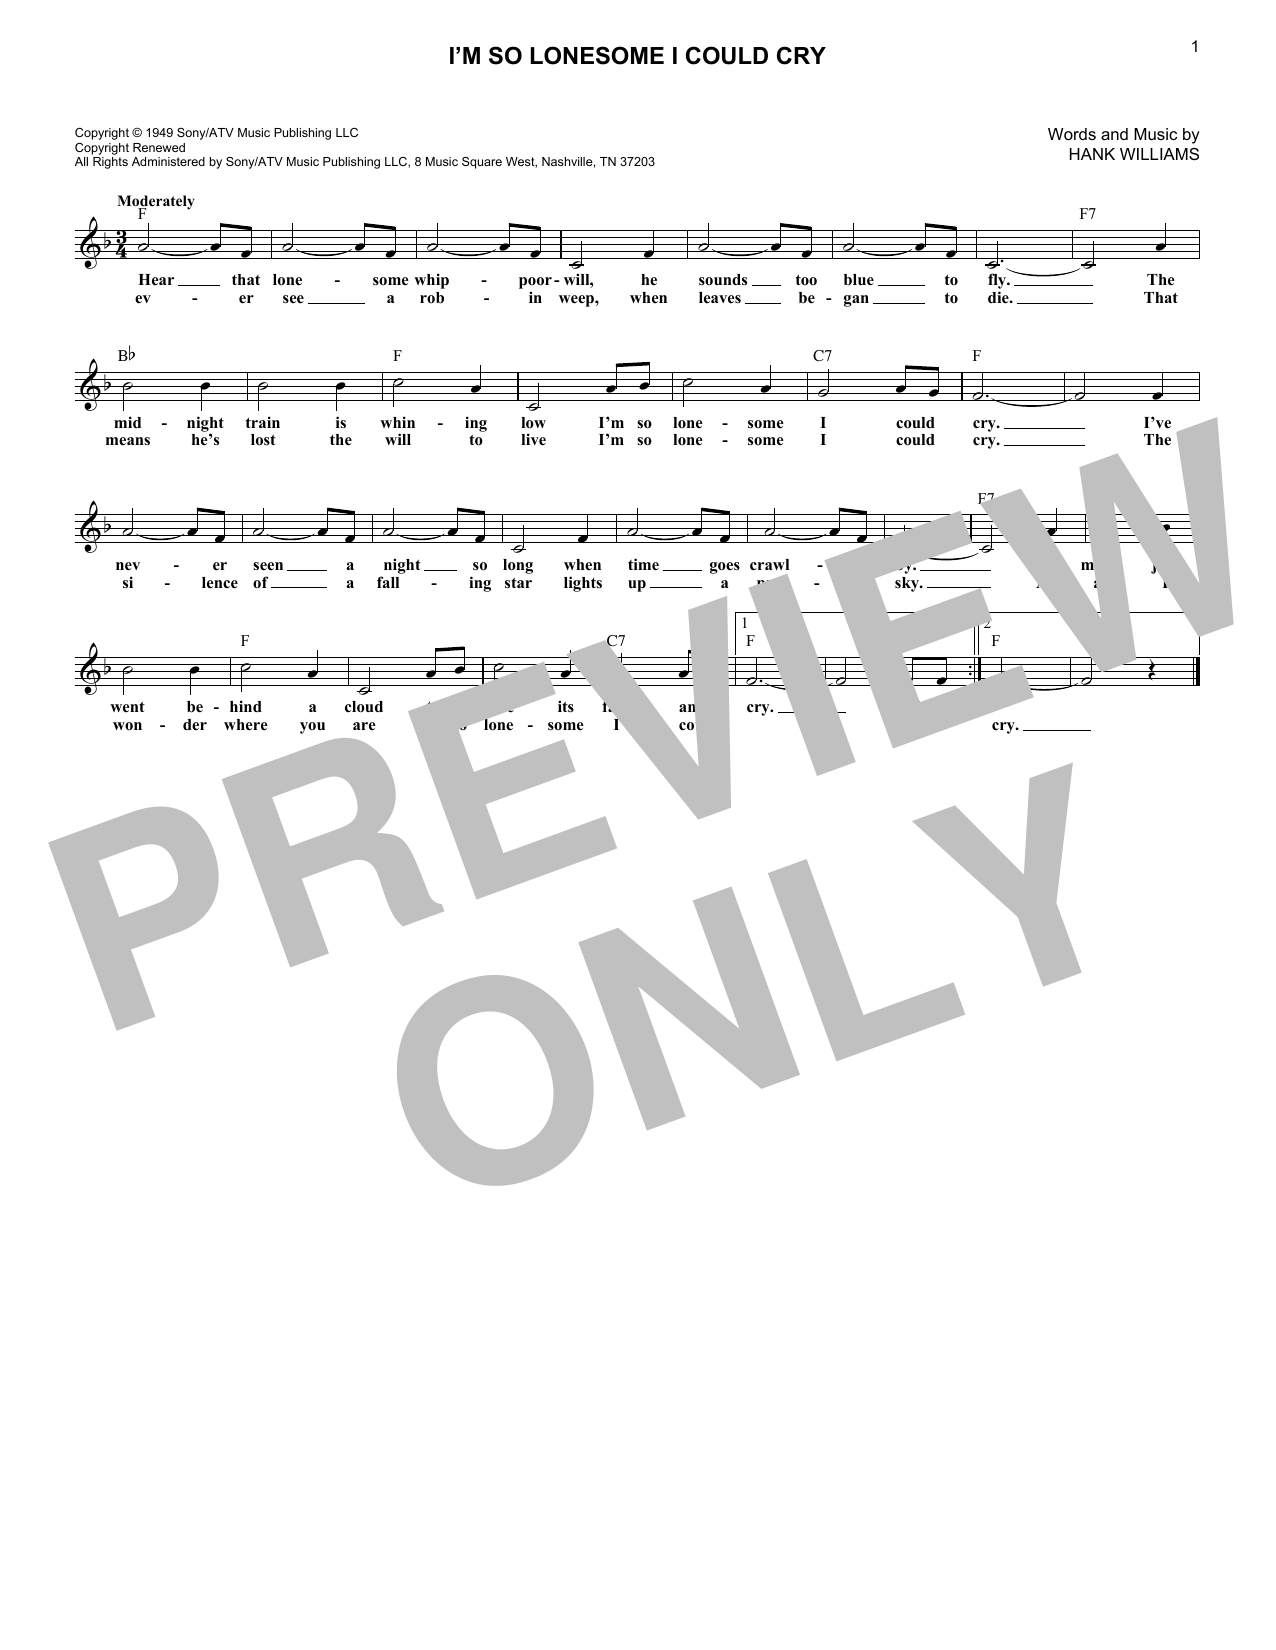 Download Hank Williams I'm So Lonesome I Could Cry Sheet Music